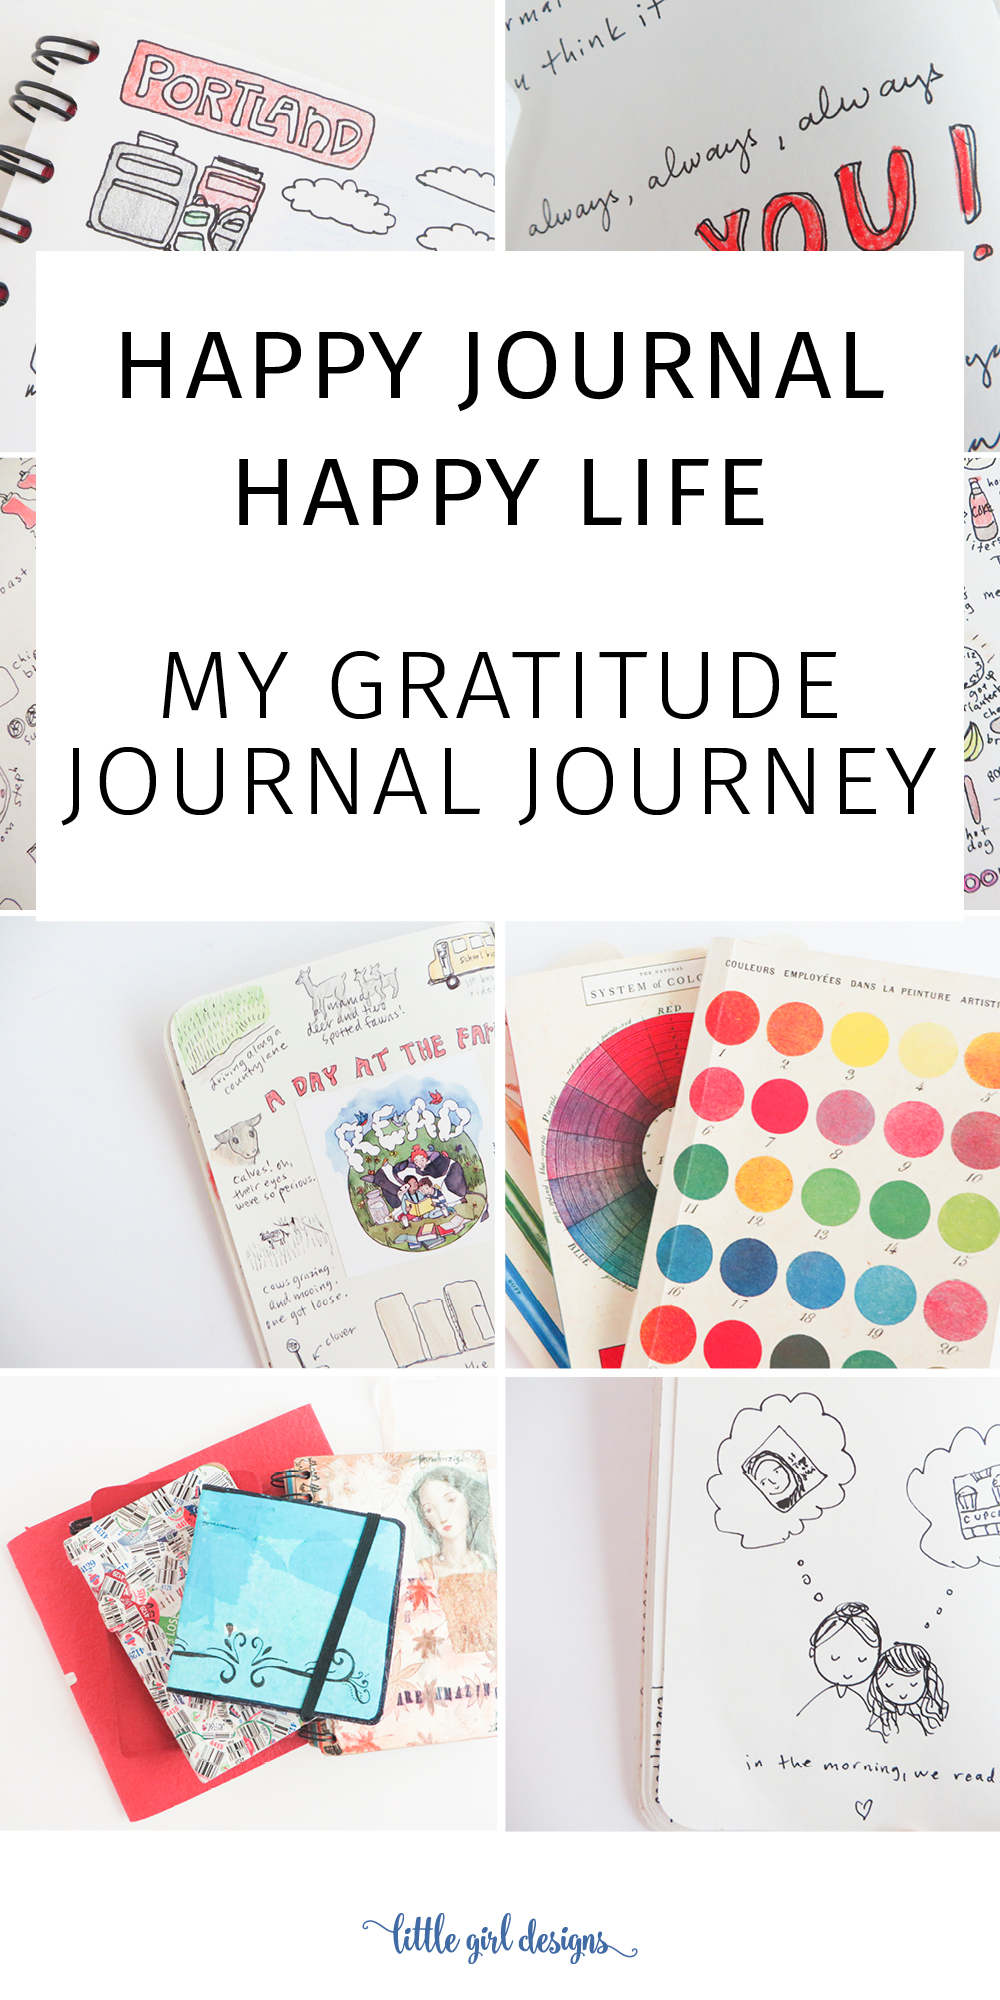 Have you ever kept a gratitude journal? How about a happy journal? This eBook shares how Jennie Moraitis began drawing small vignettes of her day years ago . . . and discovered a deep joy and happiness. It's gratitude journal 2.0. You're going to love this!